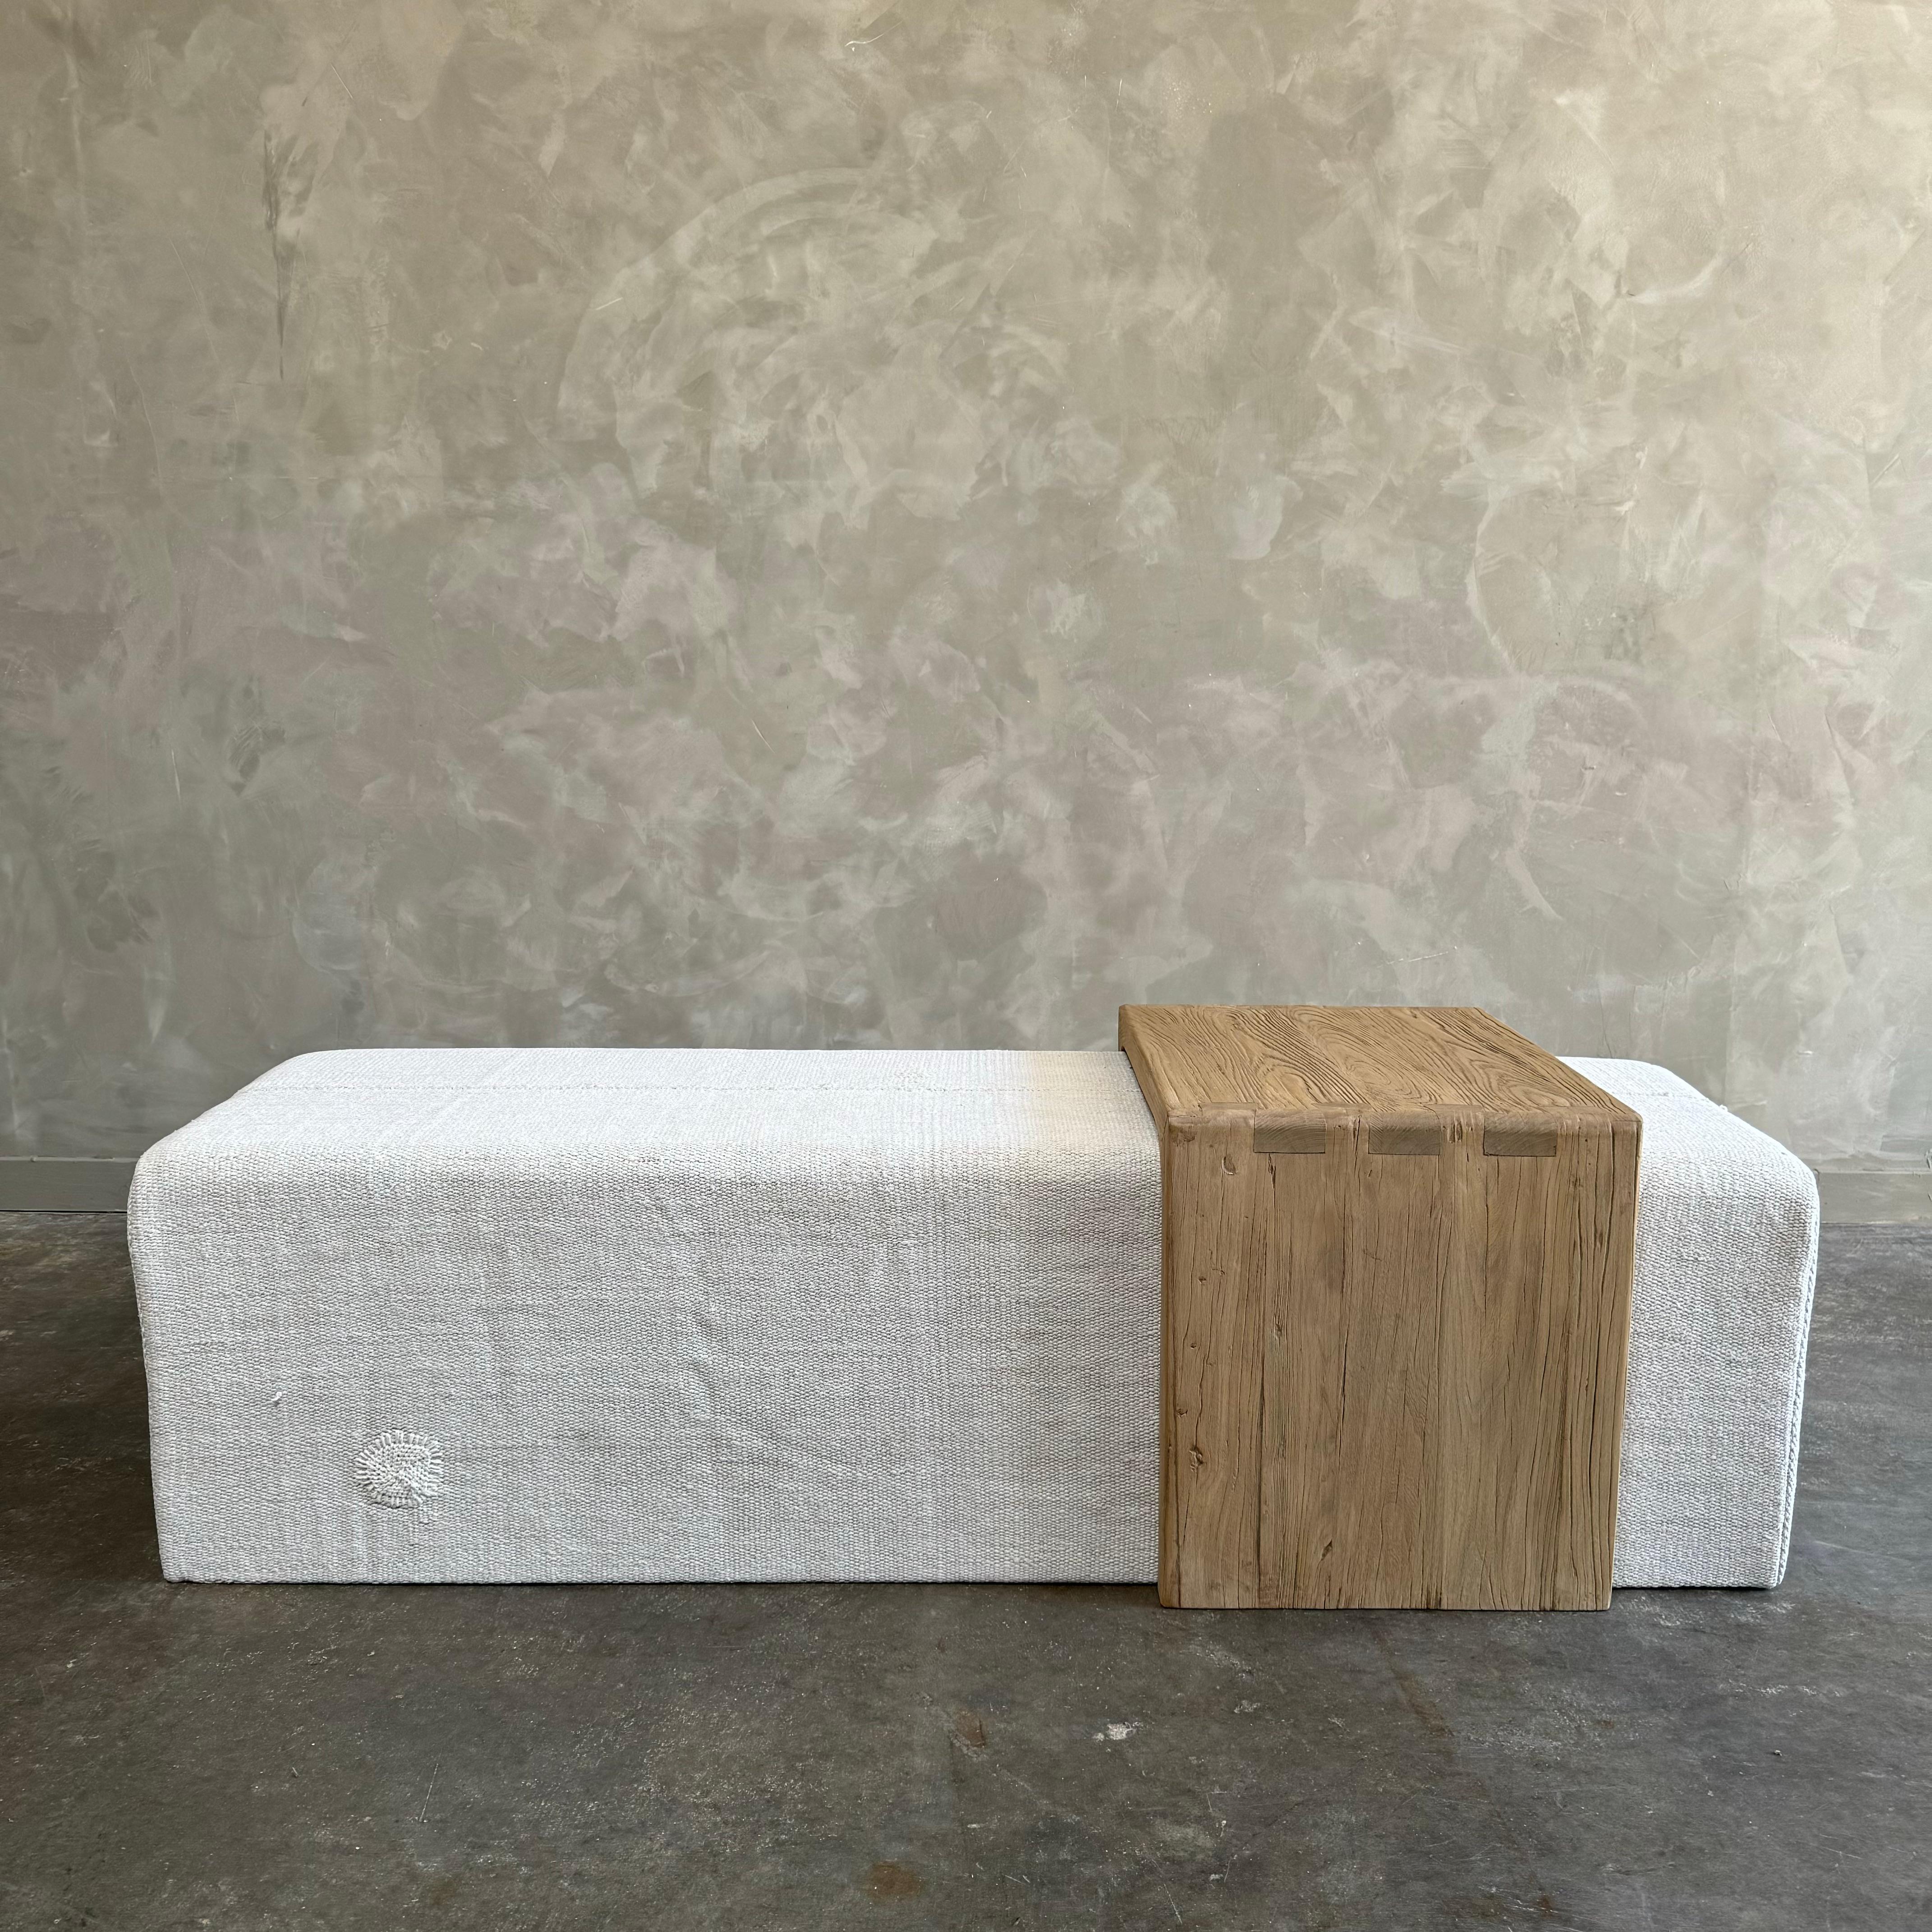 Our cube ottoman is upholstered in a beautiful hemp rug. A light color give this a versatile style. The hand-crafted solid elm wood waterfall has unique characteristics with beautiful grain and texture.